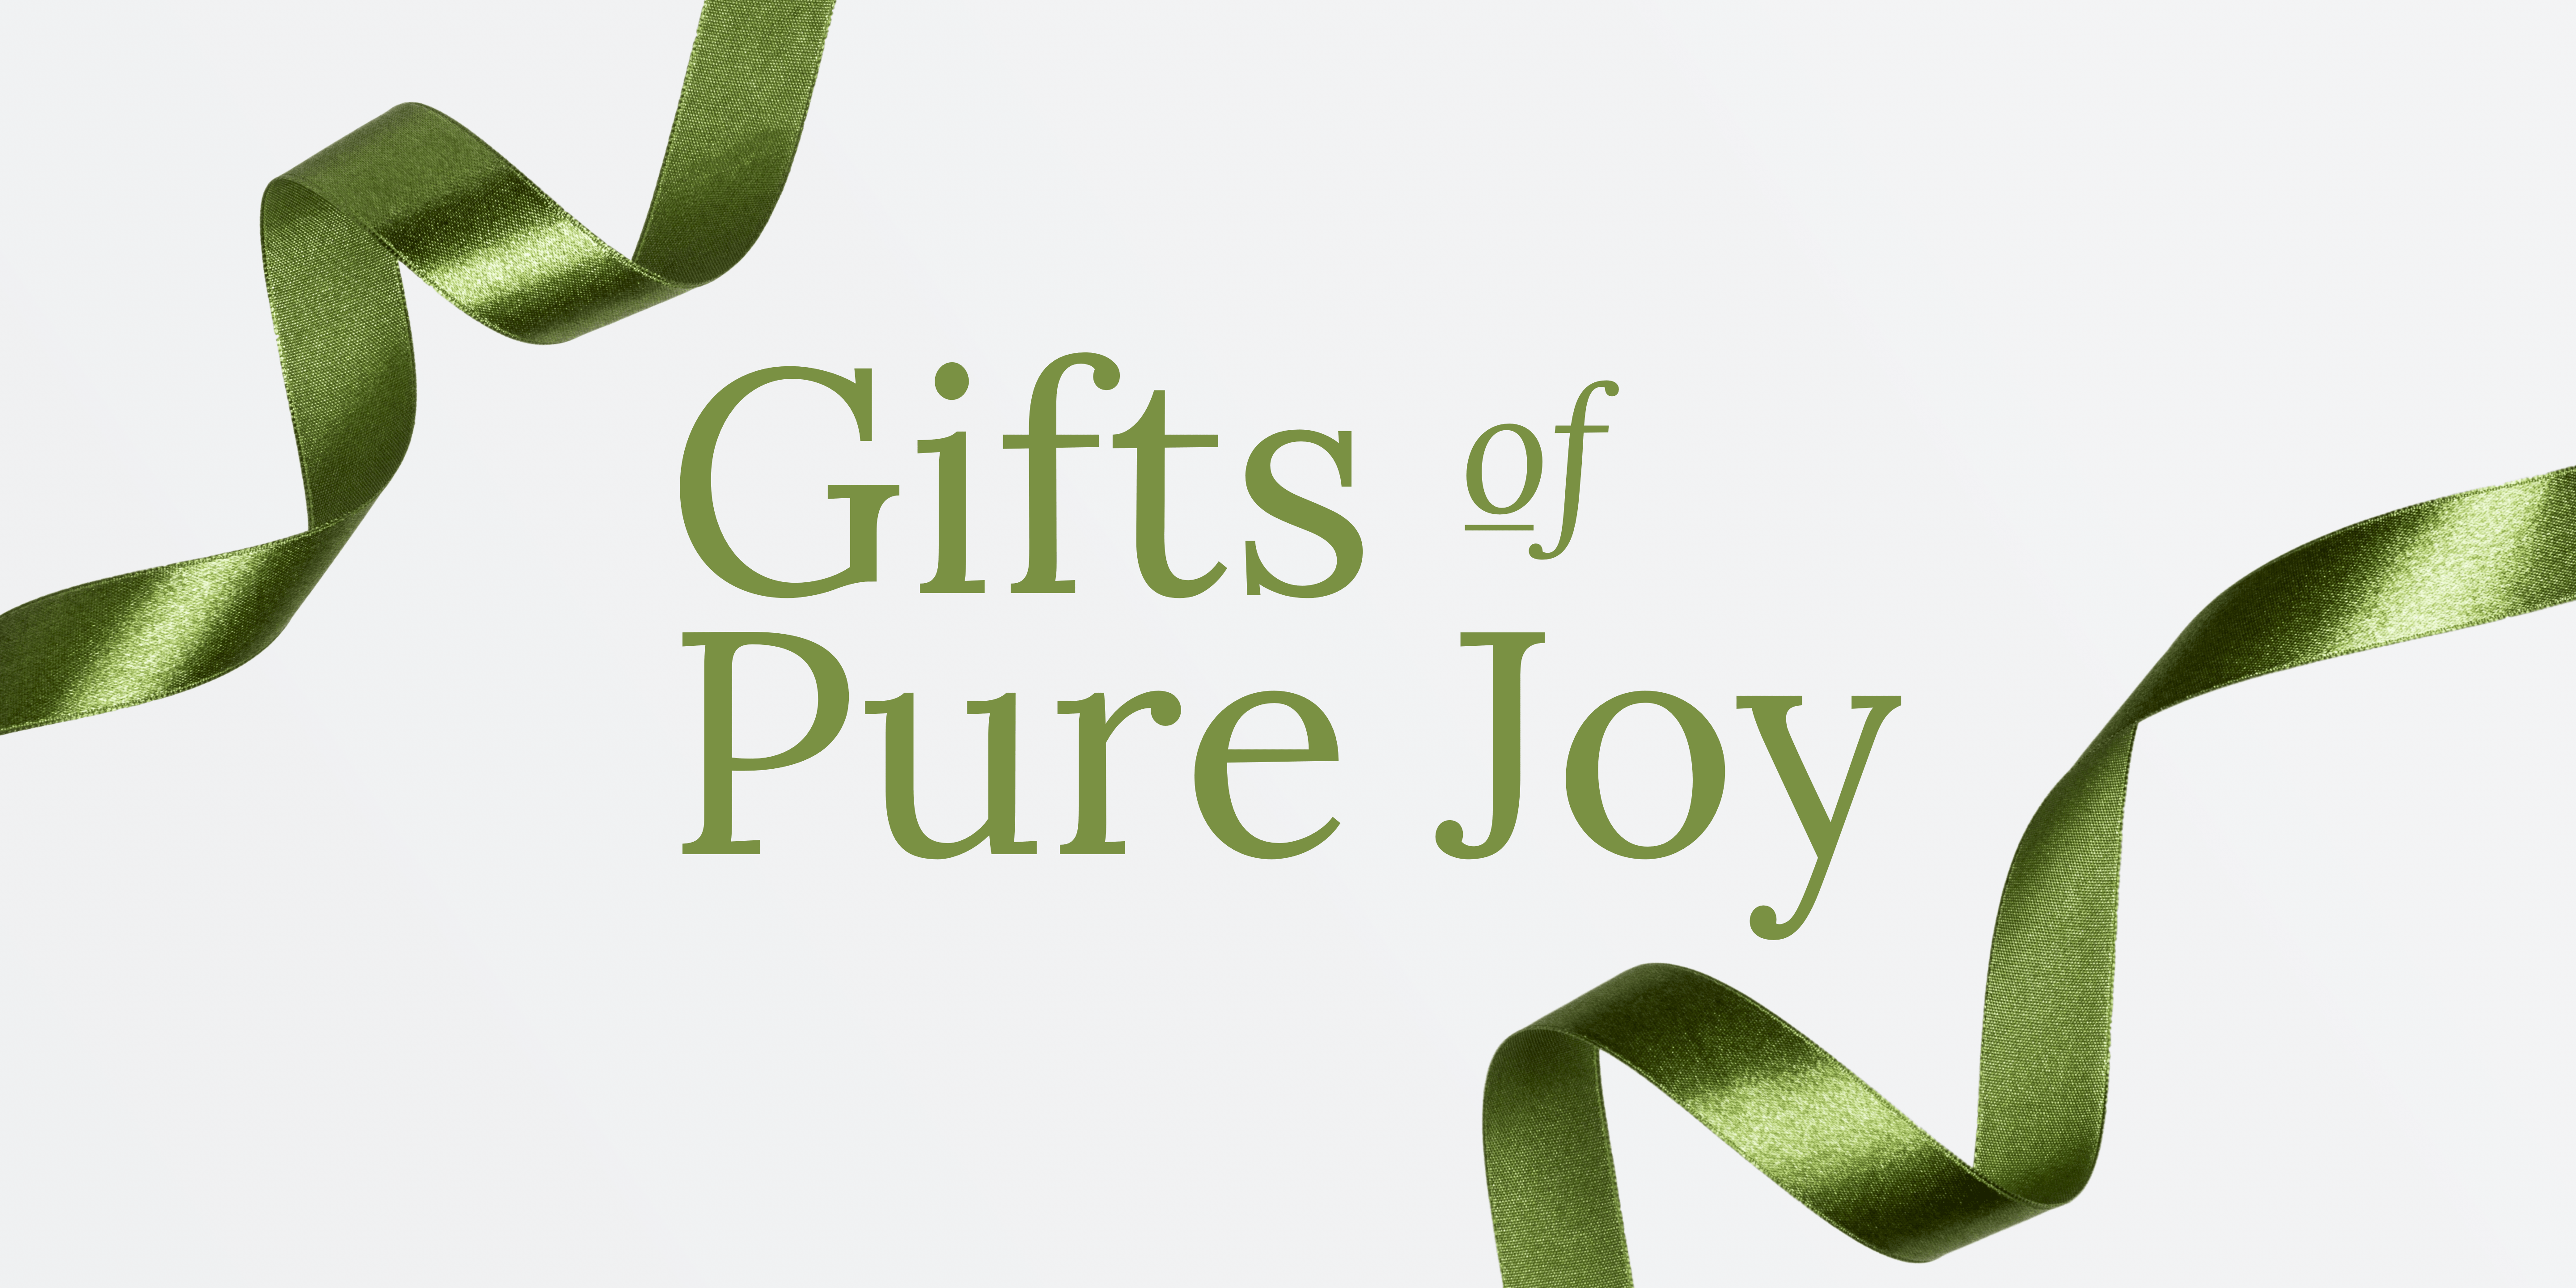 Gifts of Pure Joy